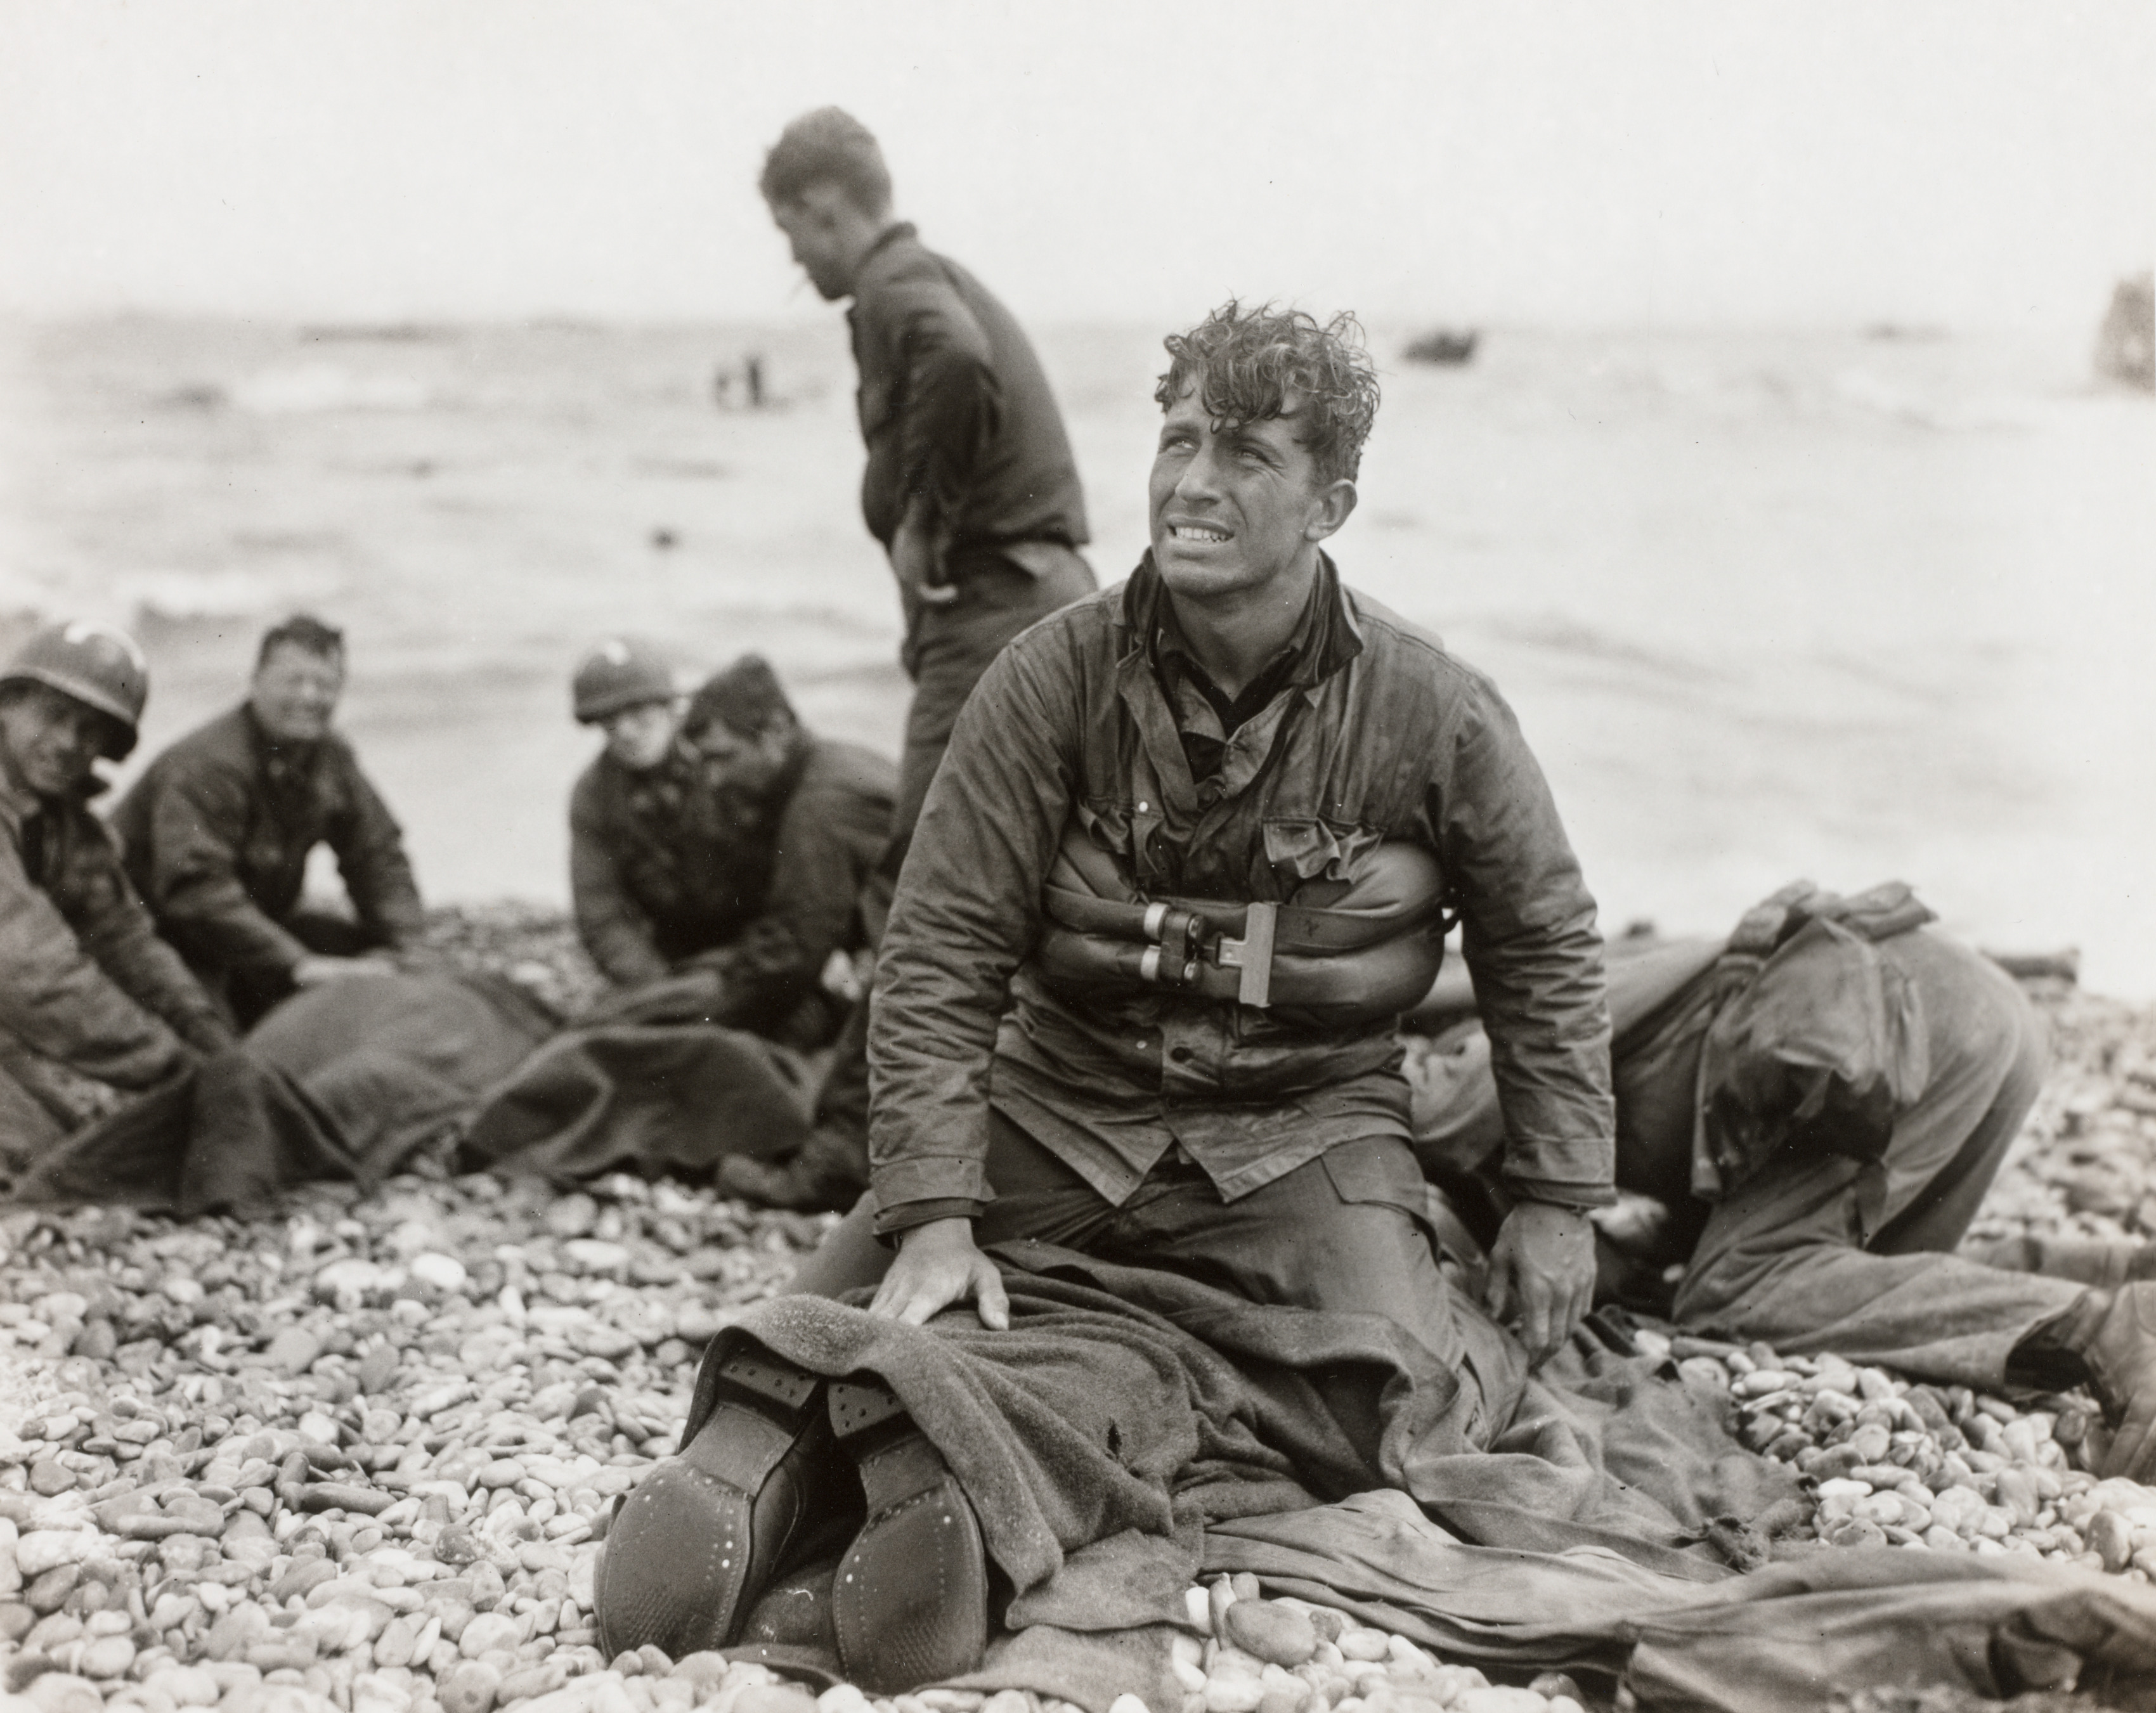 D-Day Rescue, Omaha Beach, June 7, 1944